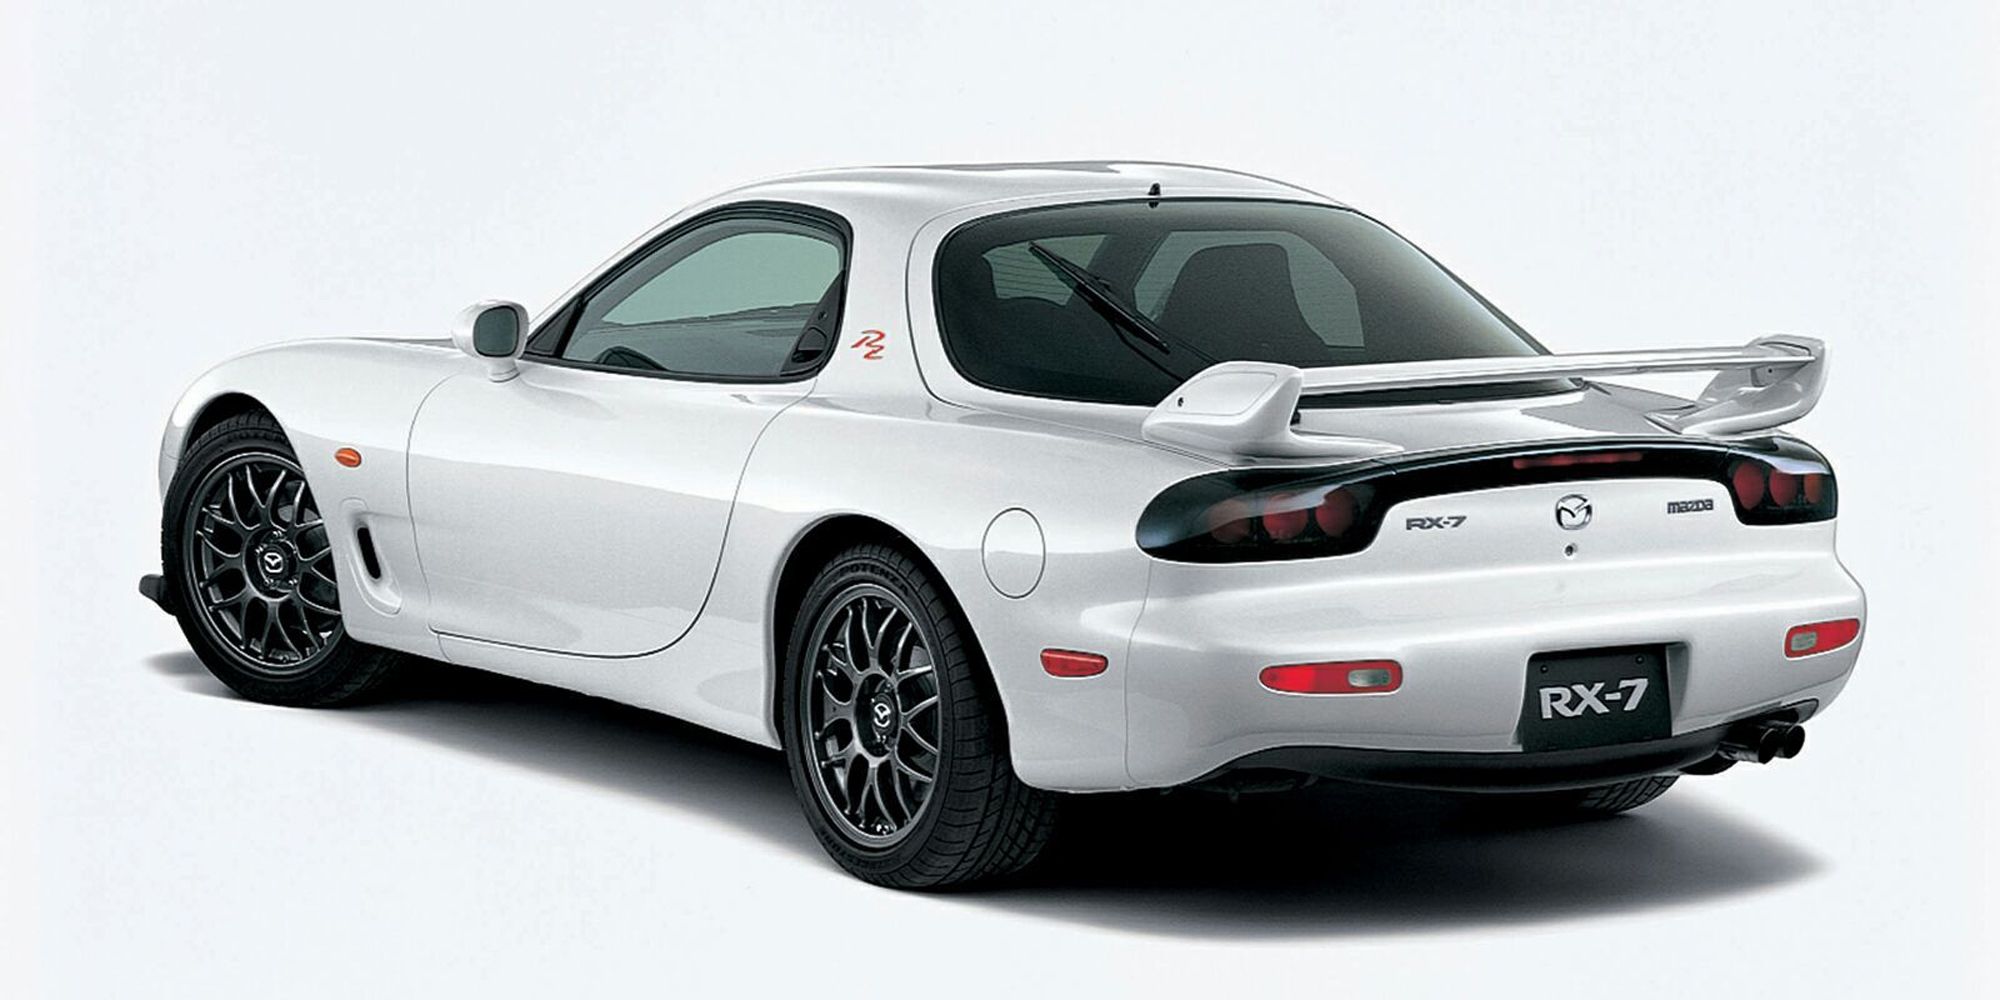 The rear of a white FD RX-7 RZ